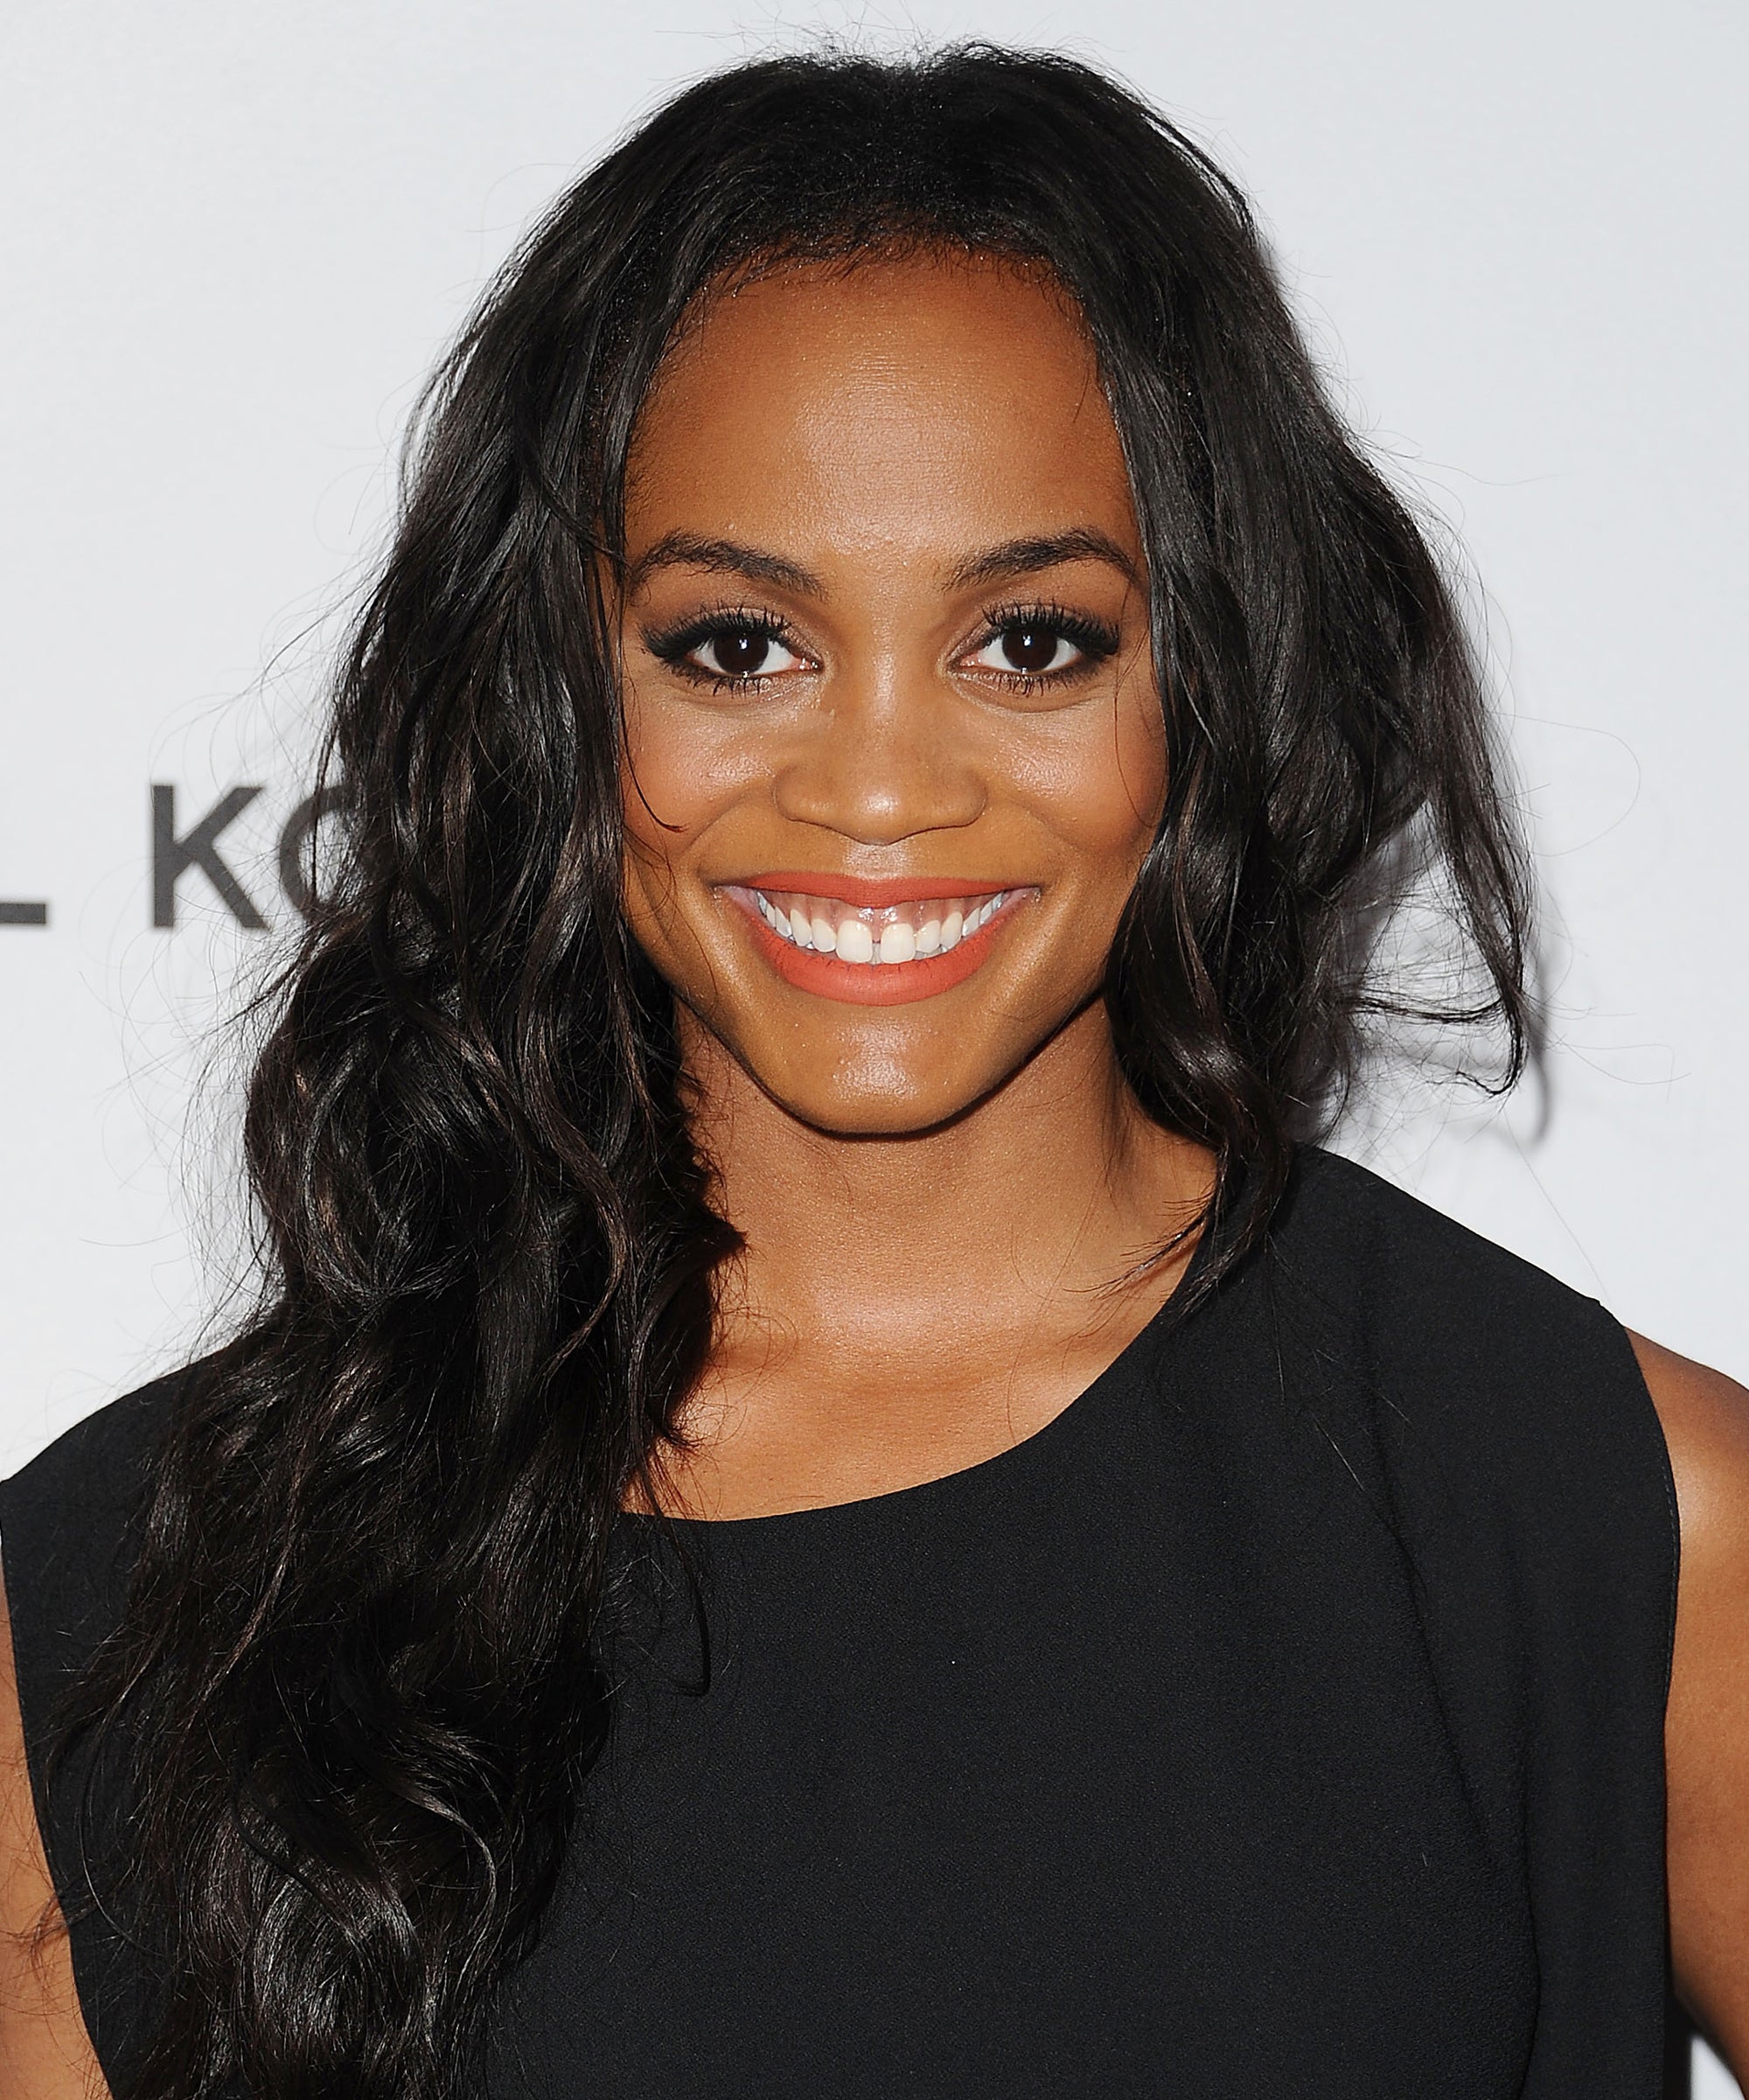 How Did Rachel Lindsay's Lashes Stay Intact Between Crying Sessions on The Bachelorette?
